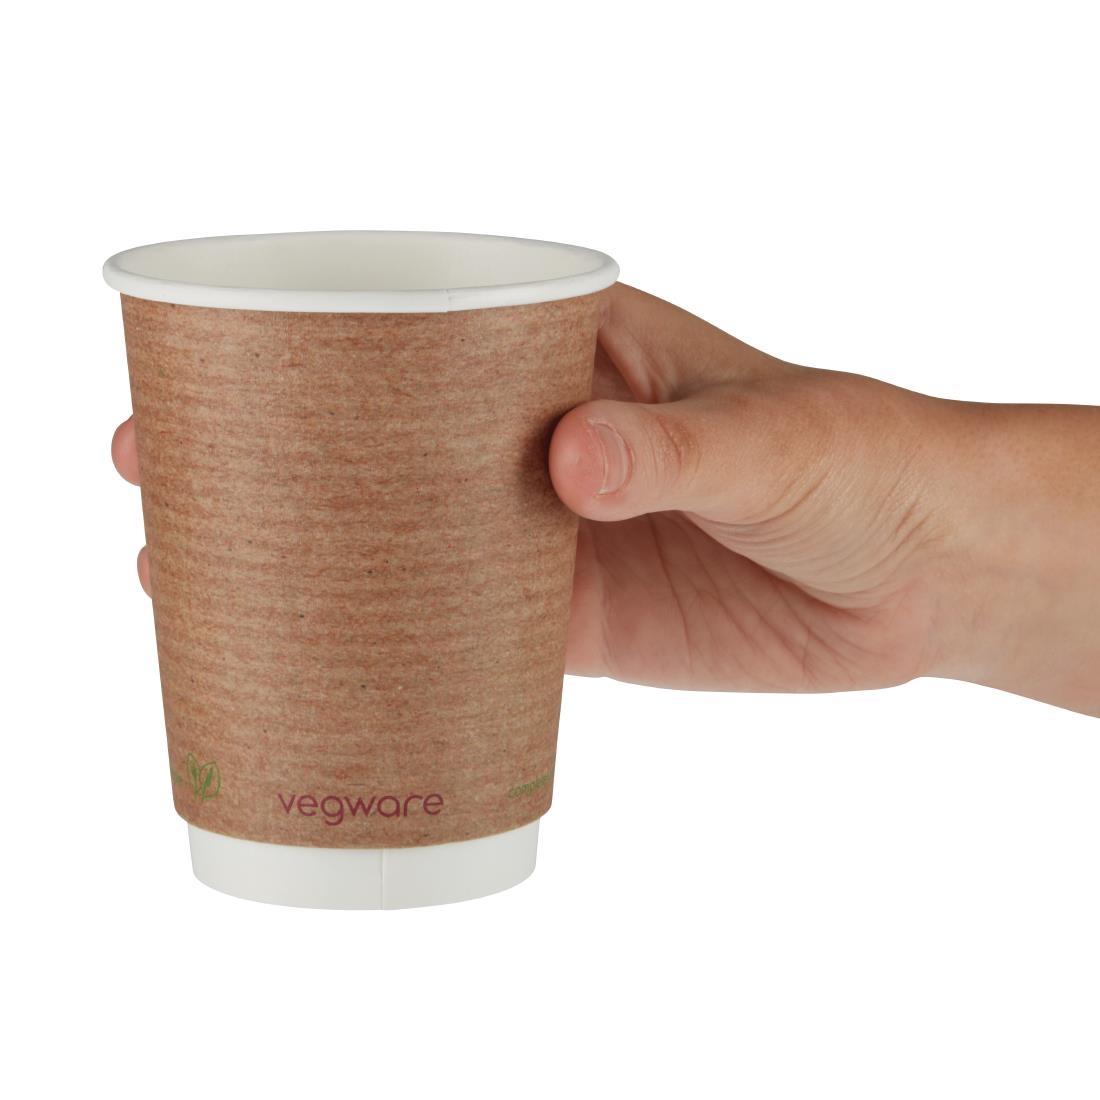 Vegware Compostable Coffee Cups Double Wall 340ml / 12oz (Pack of 500) - GH021  - 3